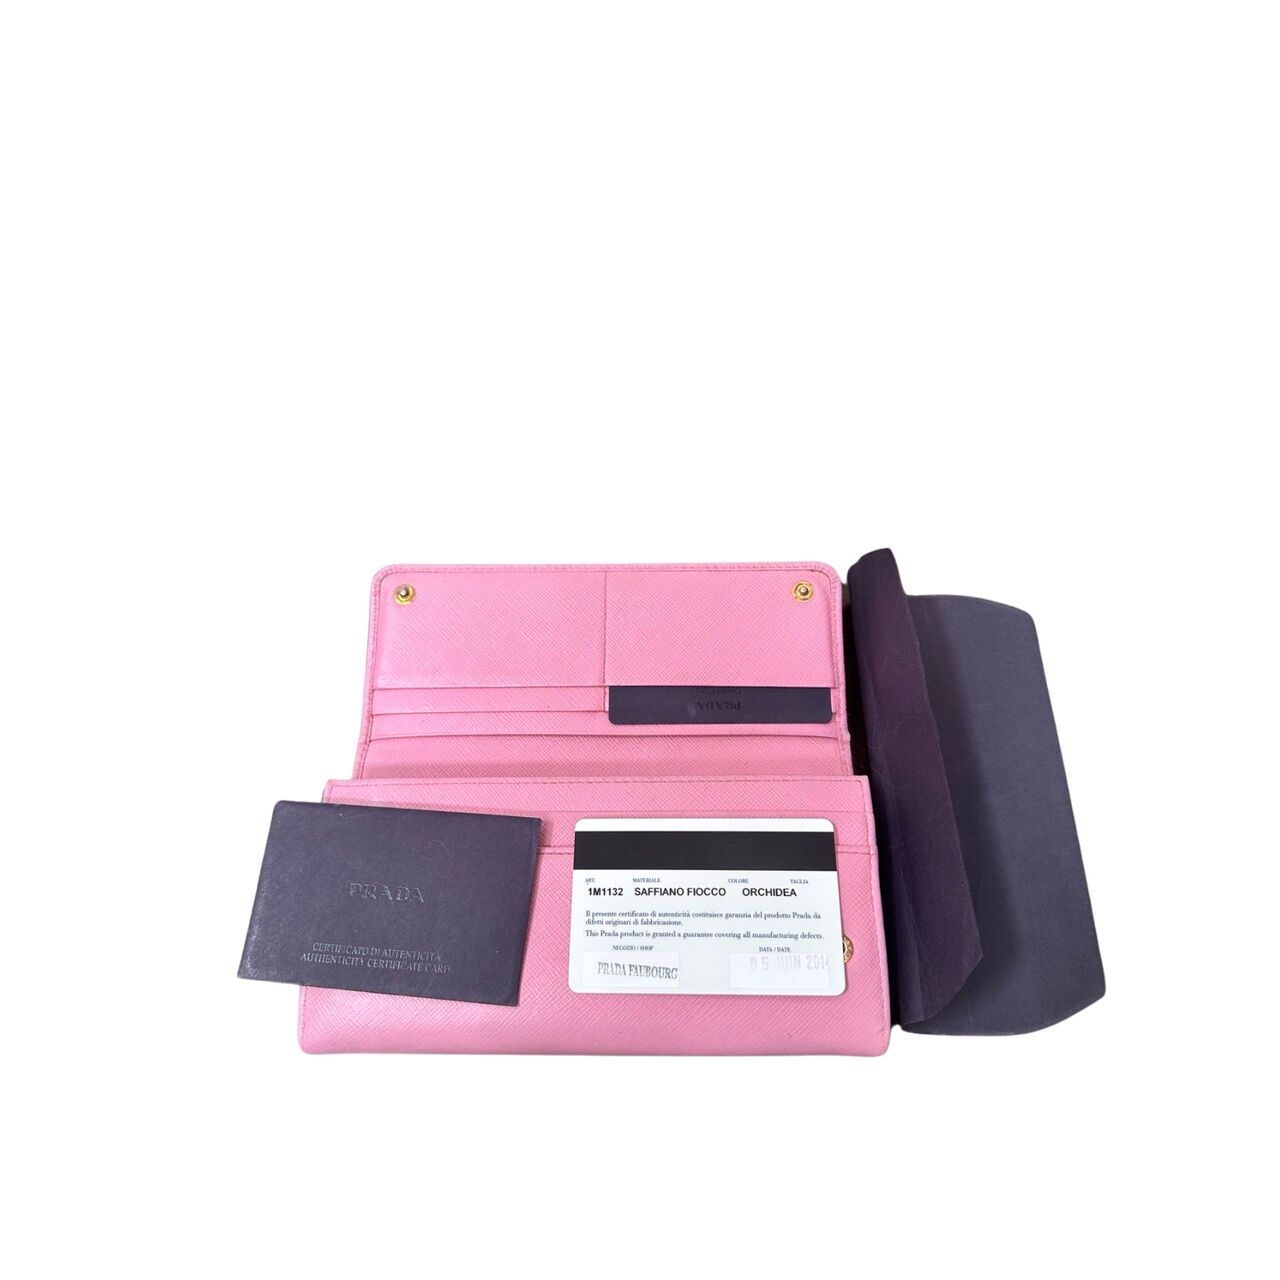 Prada Pink Saffiano Leather Long Wallet With Chained Card Case